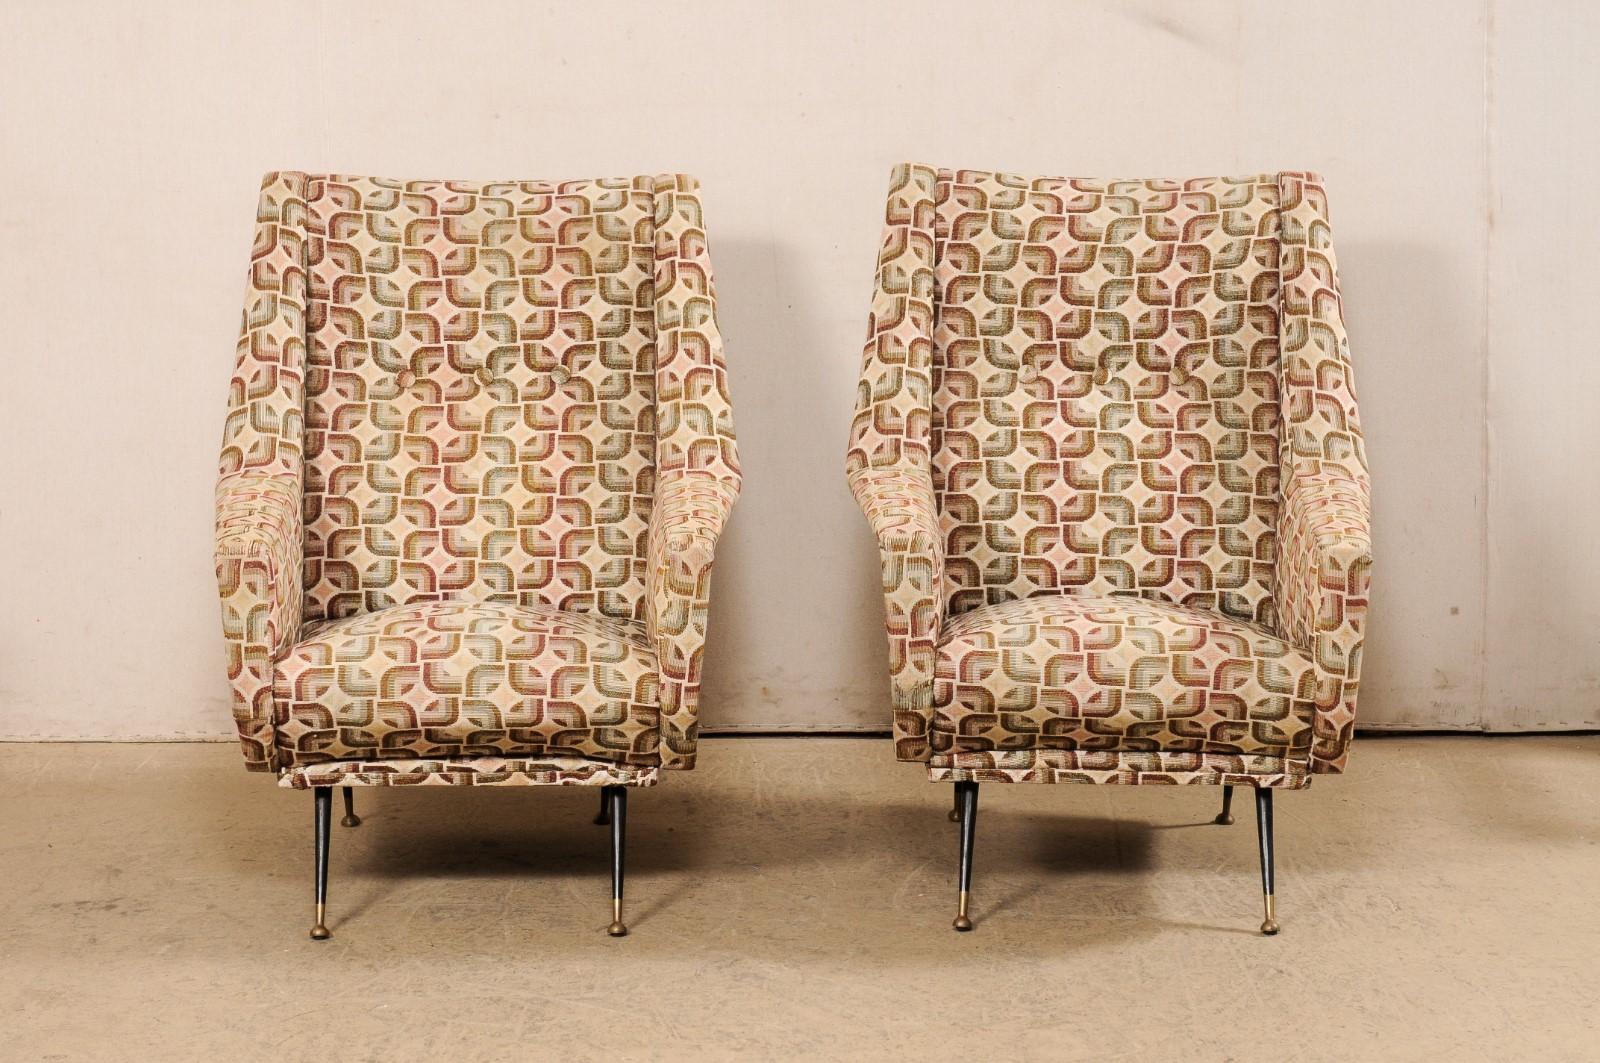 20th Century Midcentury Pair of Italian Modern-Design Wingback Chairs For Sale